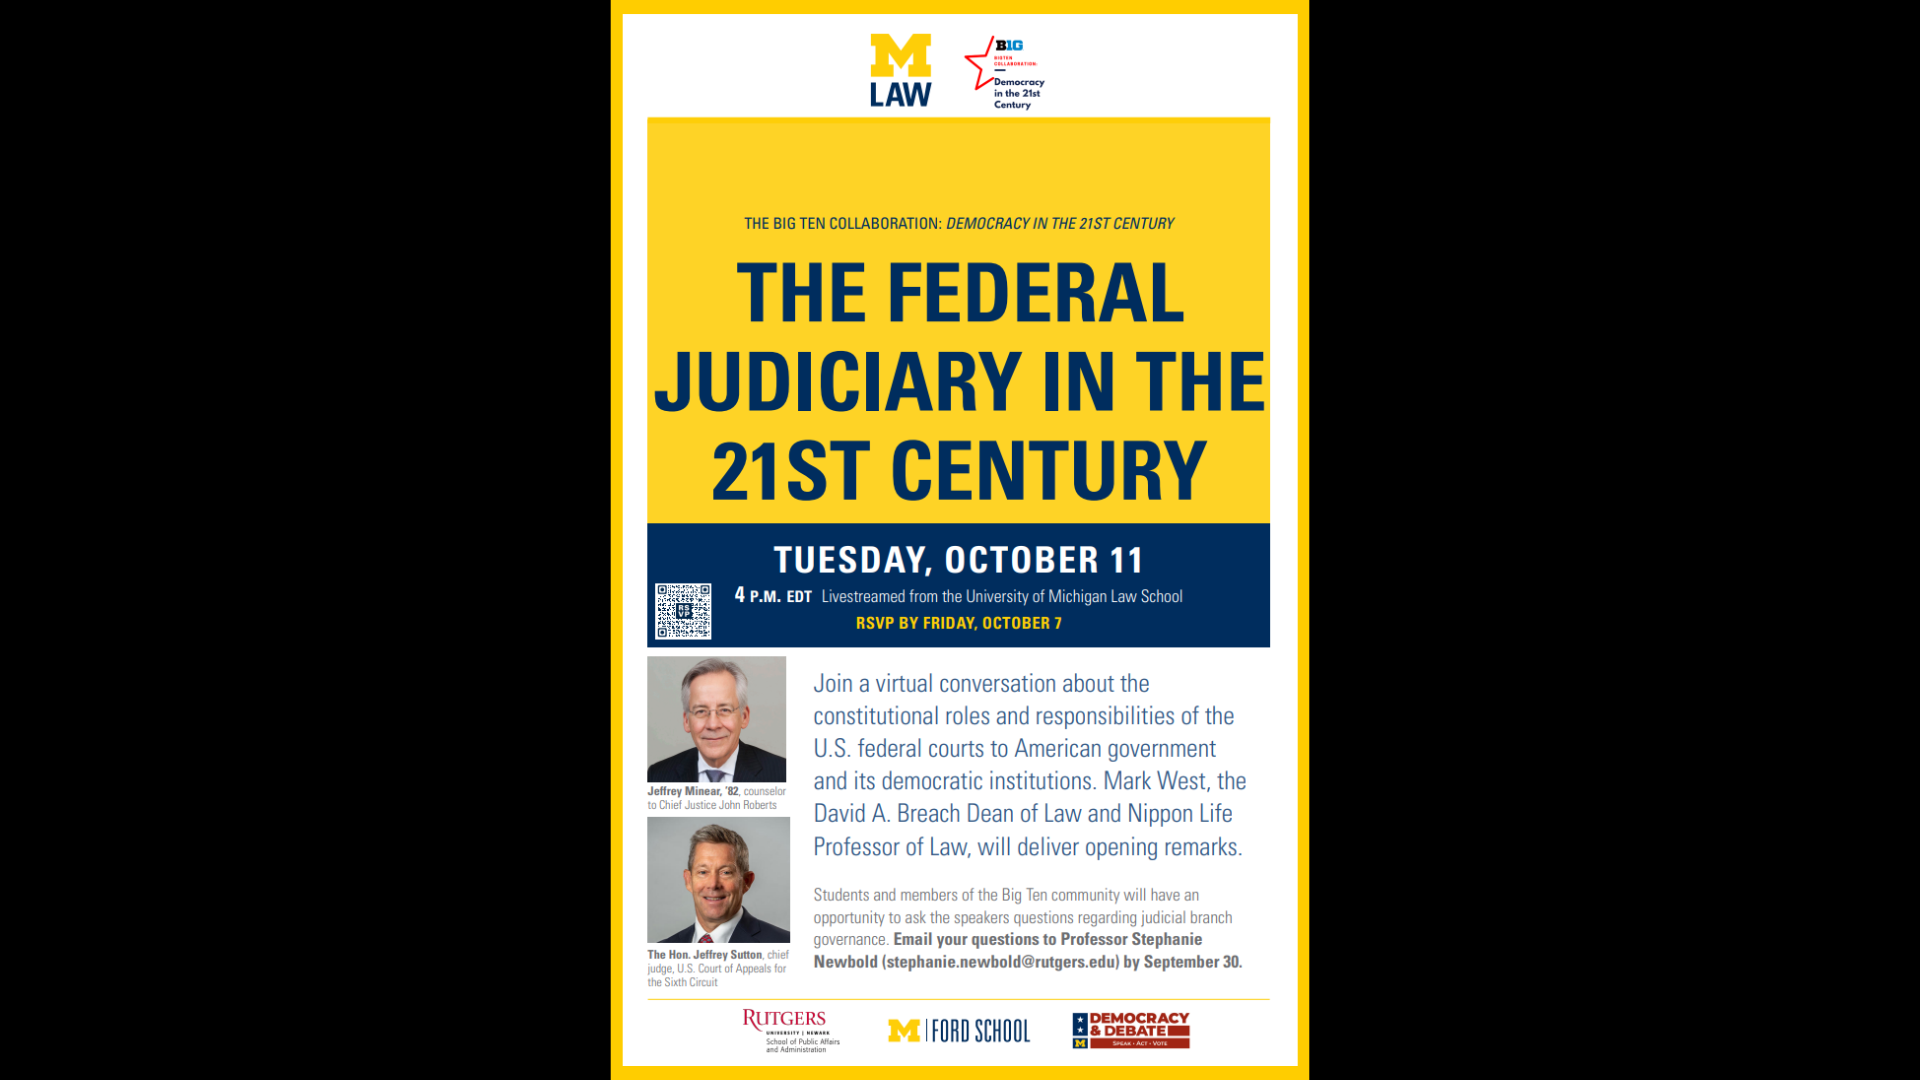 The Big Ten Collaboration: Democracy in the 21st Century. The Federal Judiciary in the 21st Century. Tuesday, October 11. 4 p.m. EDT. Livestreamed from the University of Michigan Law School. RSVP by Friday, October 7. Join a virtual conversation about the constitutional roles and responsibilities of the U.S. federal courts to America Government and its democratic institutions.